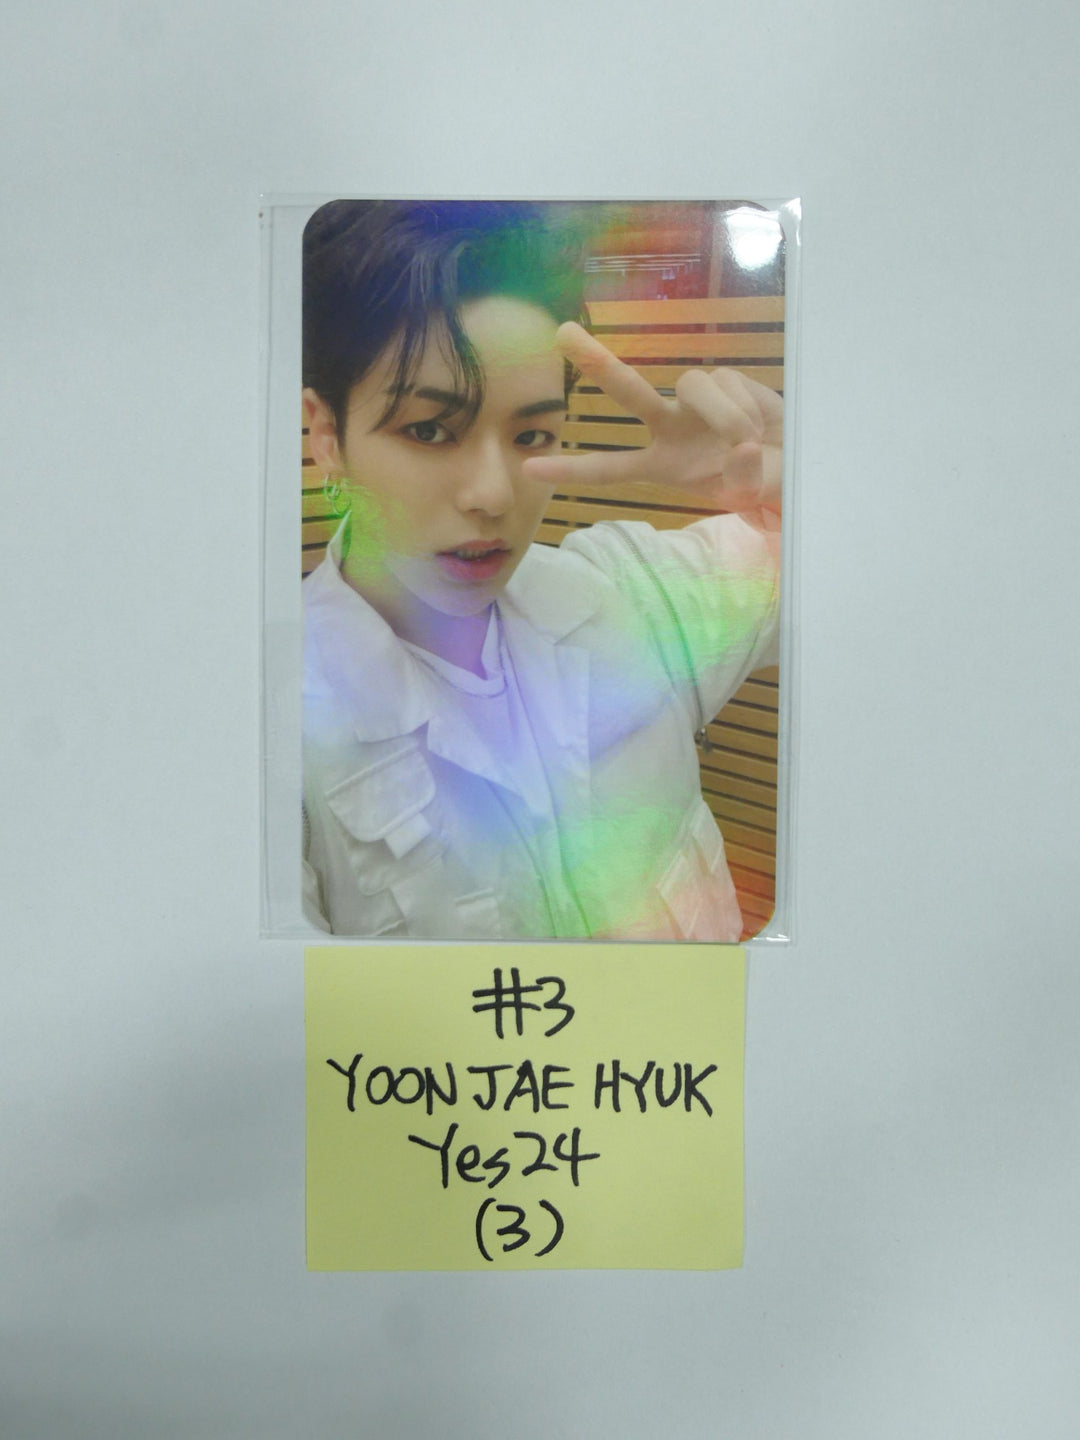 Treasure 'THE SECOND STEP : CHAPTER ONE' - Yes 24 Pre-Order Benefit Hologram Photocard